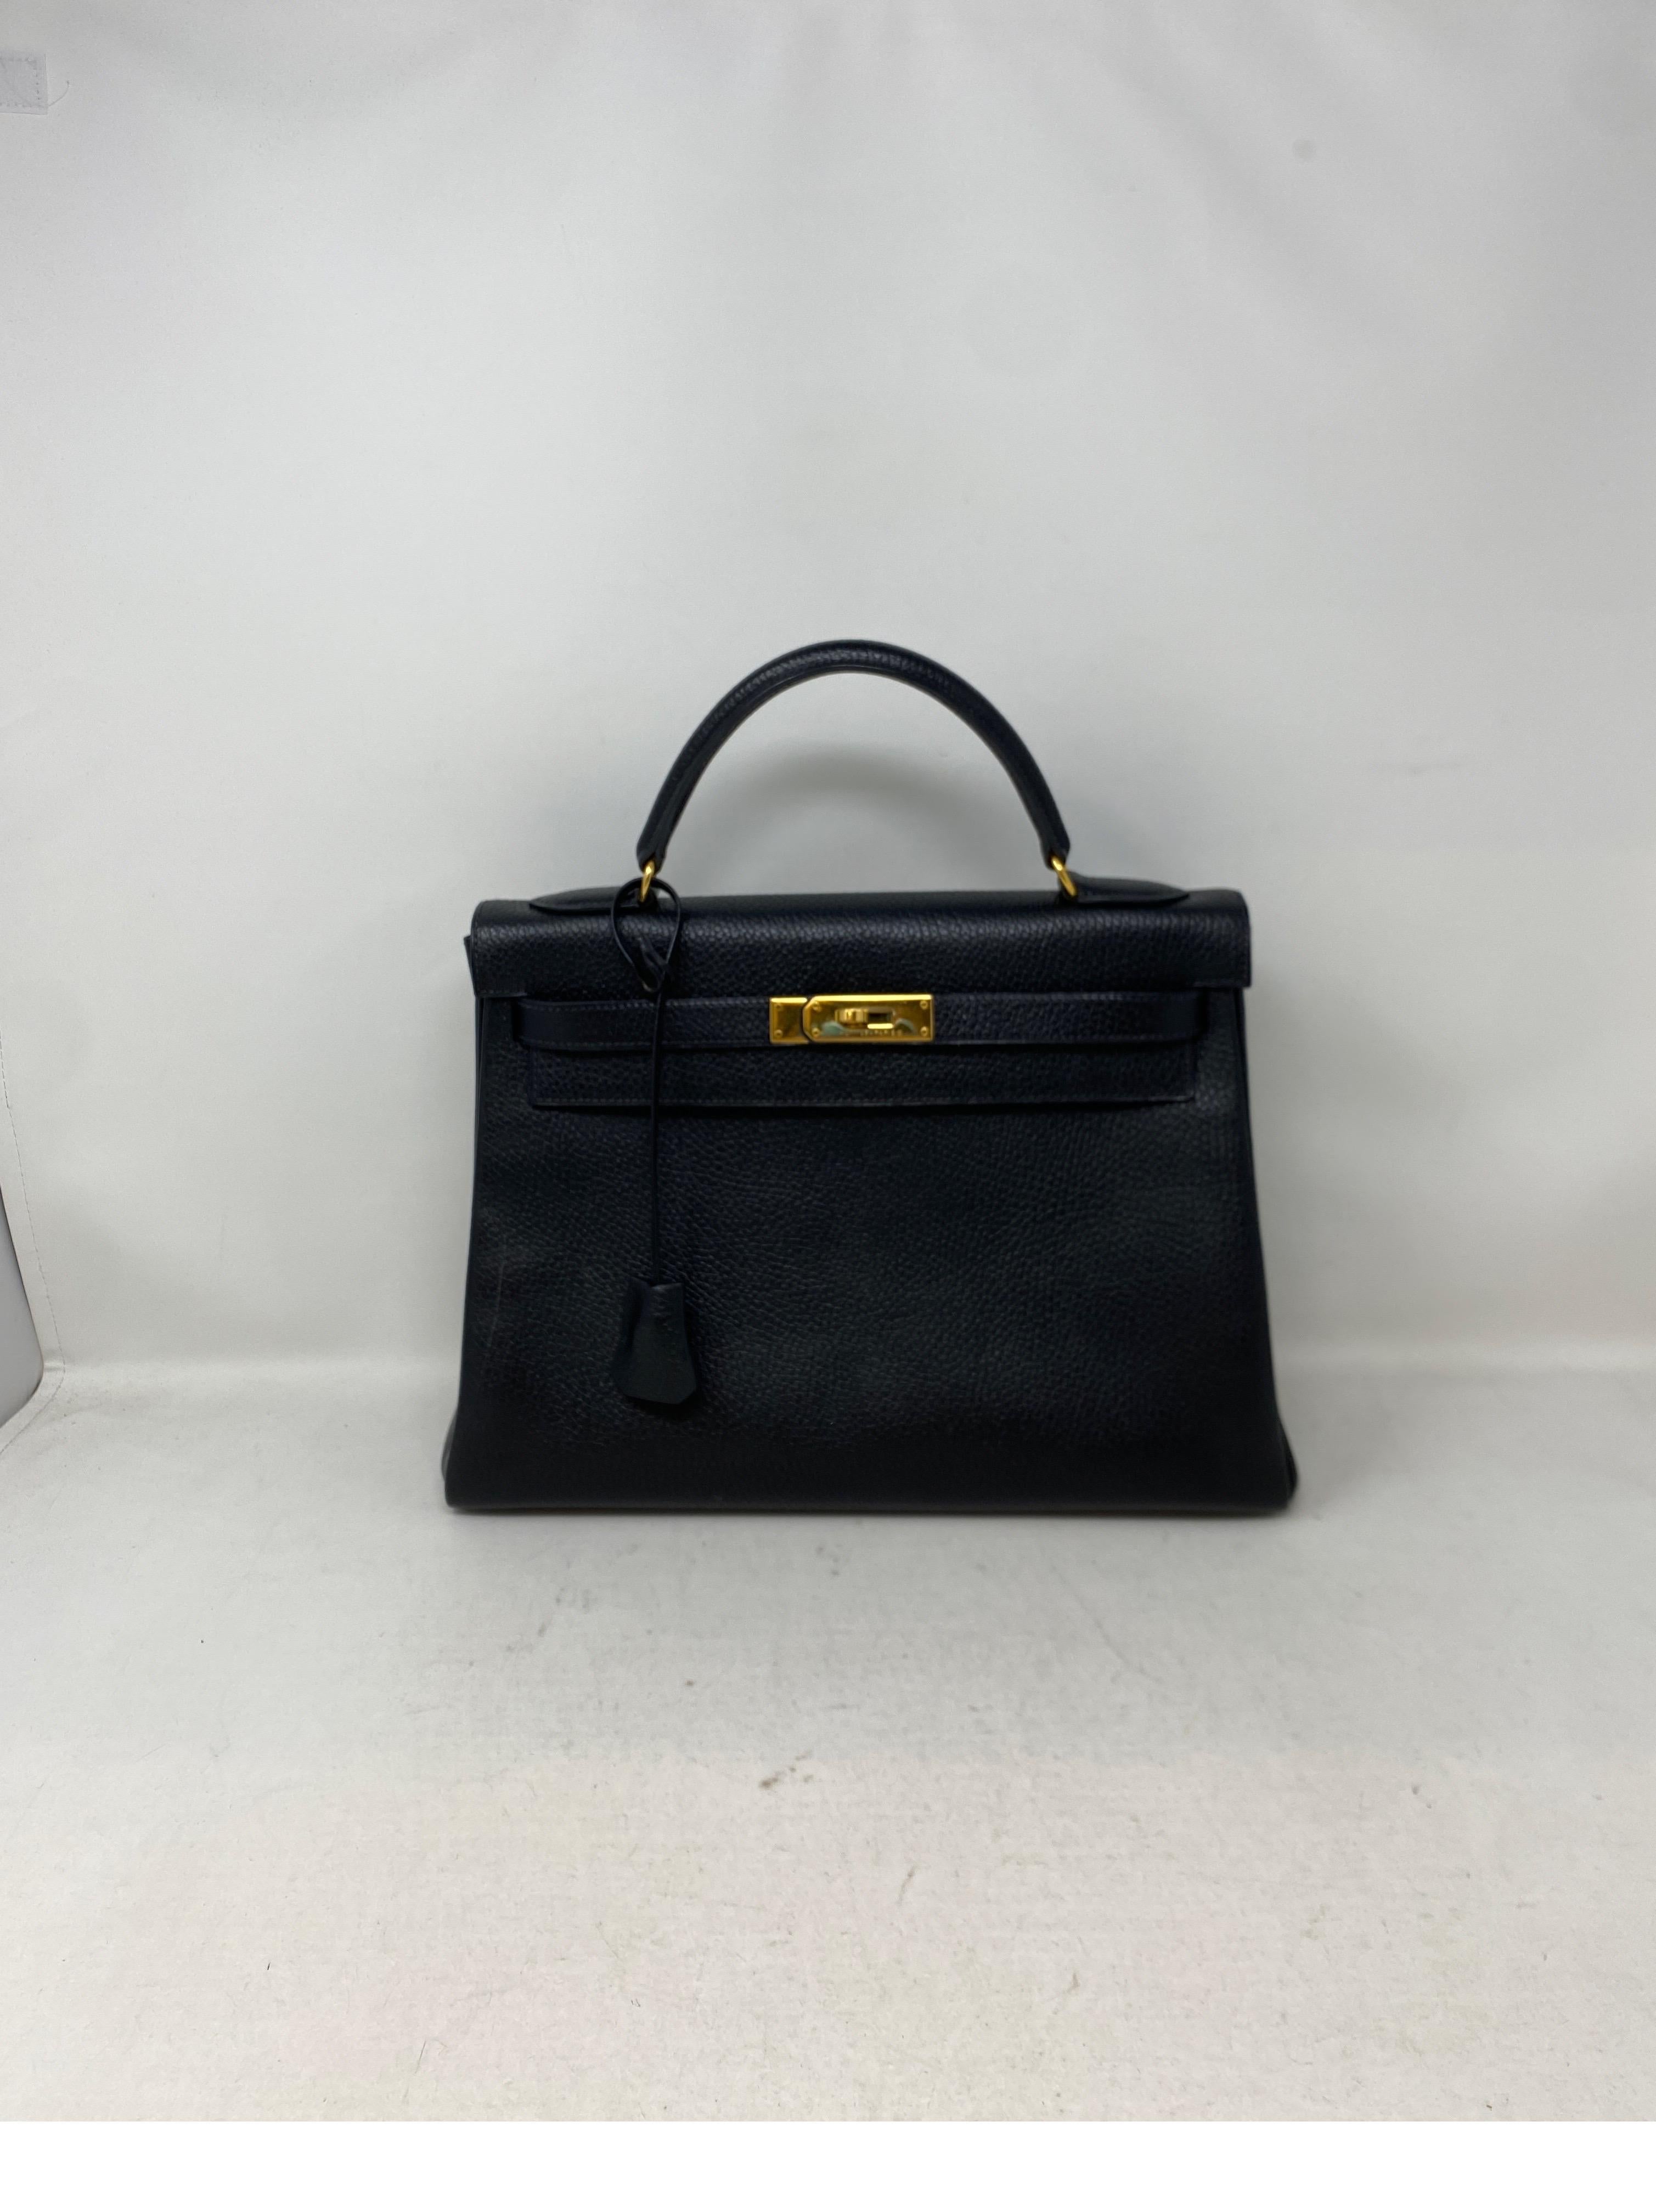 Hermes Black Kelly 32 Bag. Good condition. Kelly 32 size most wanted. Gold hardware. No extra strap included. Only top handle bag. Strap can be ordered. Vintage Kelly in very good condition. Clean interior. Guaranteed authentic. 